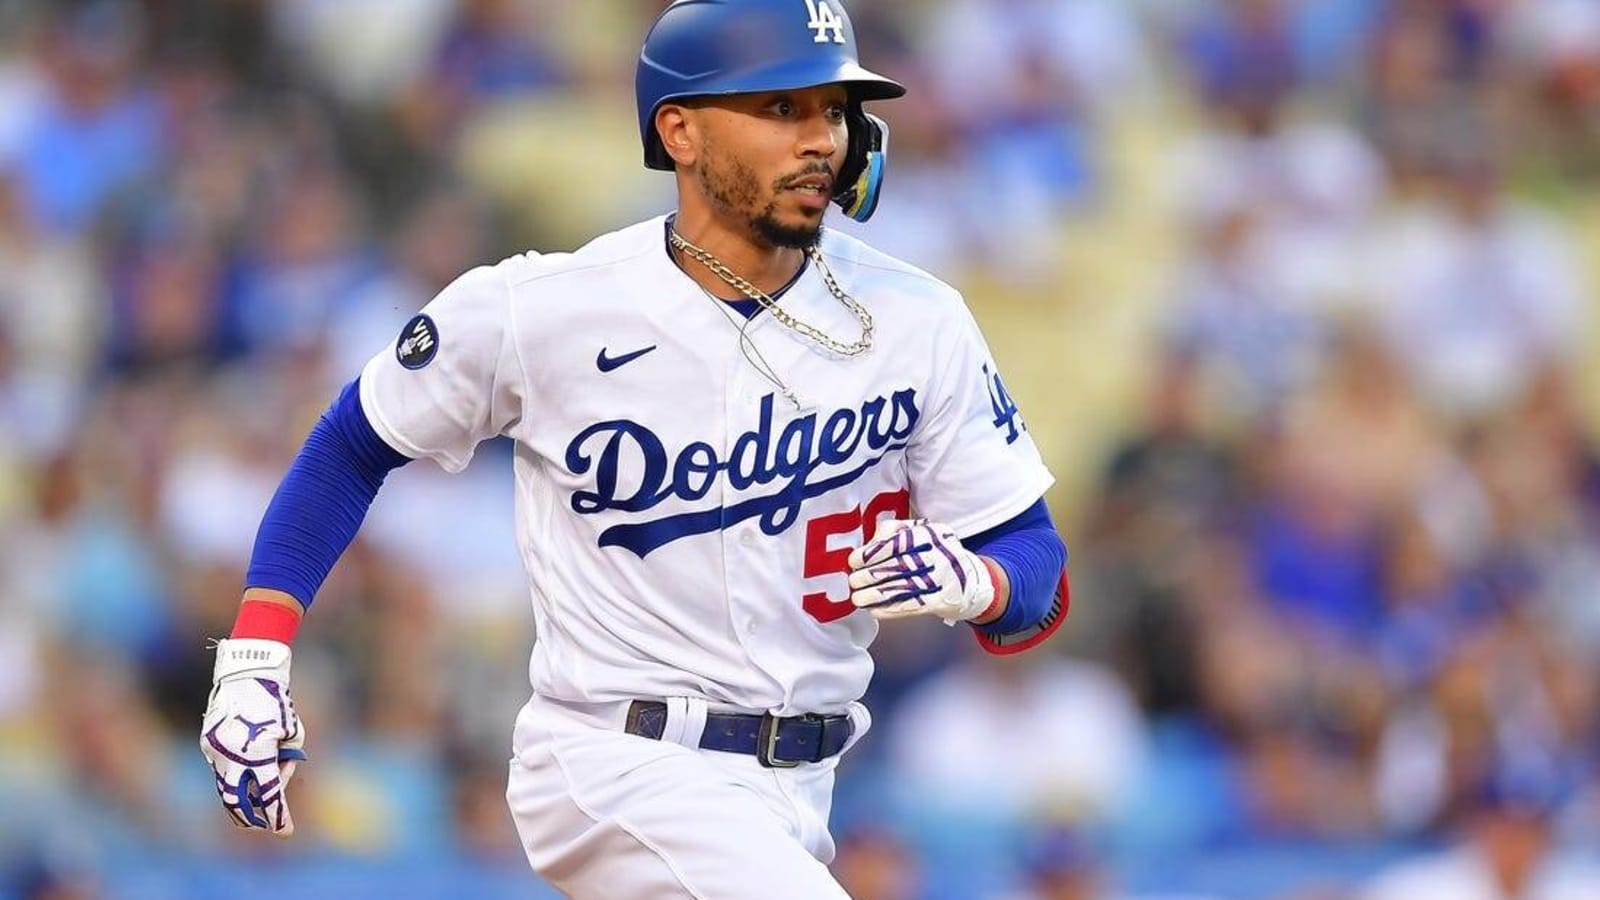 San Francisco Giants vs. Los Angeles Dodgers prediction and odds Mon. 9/5: Betts leads the way